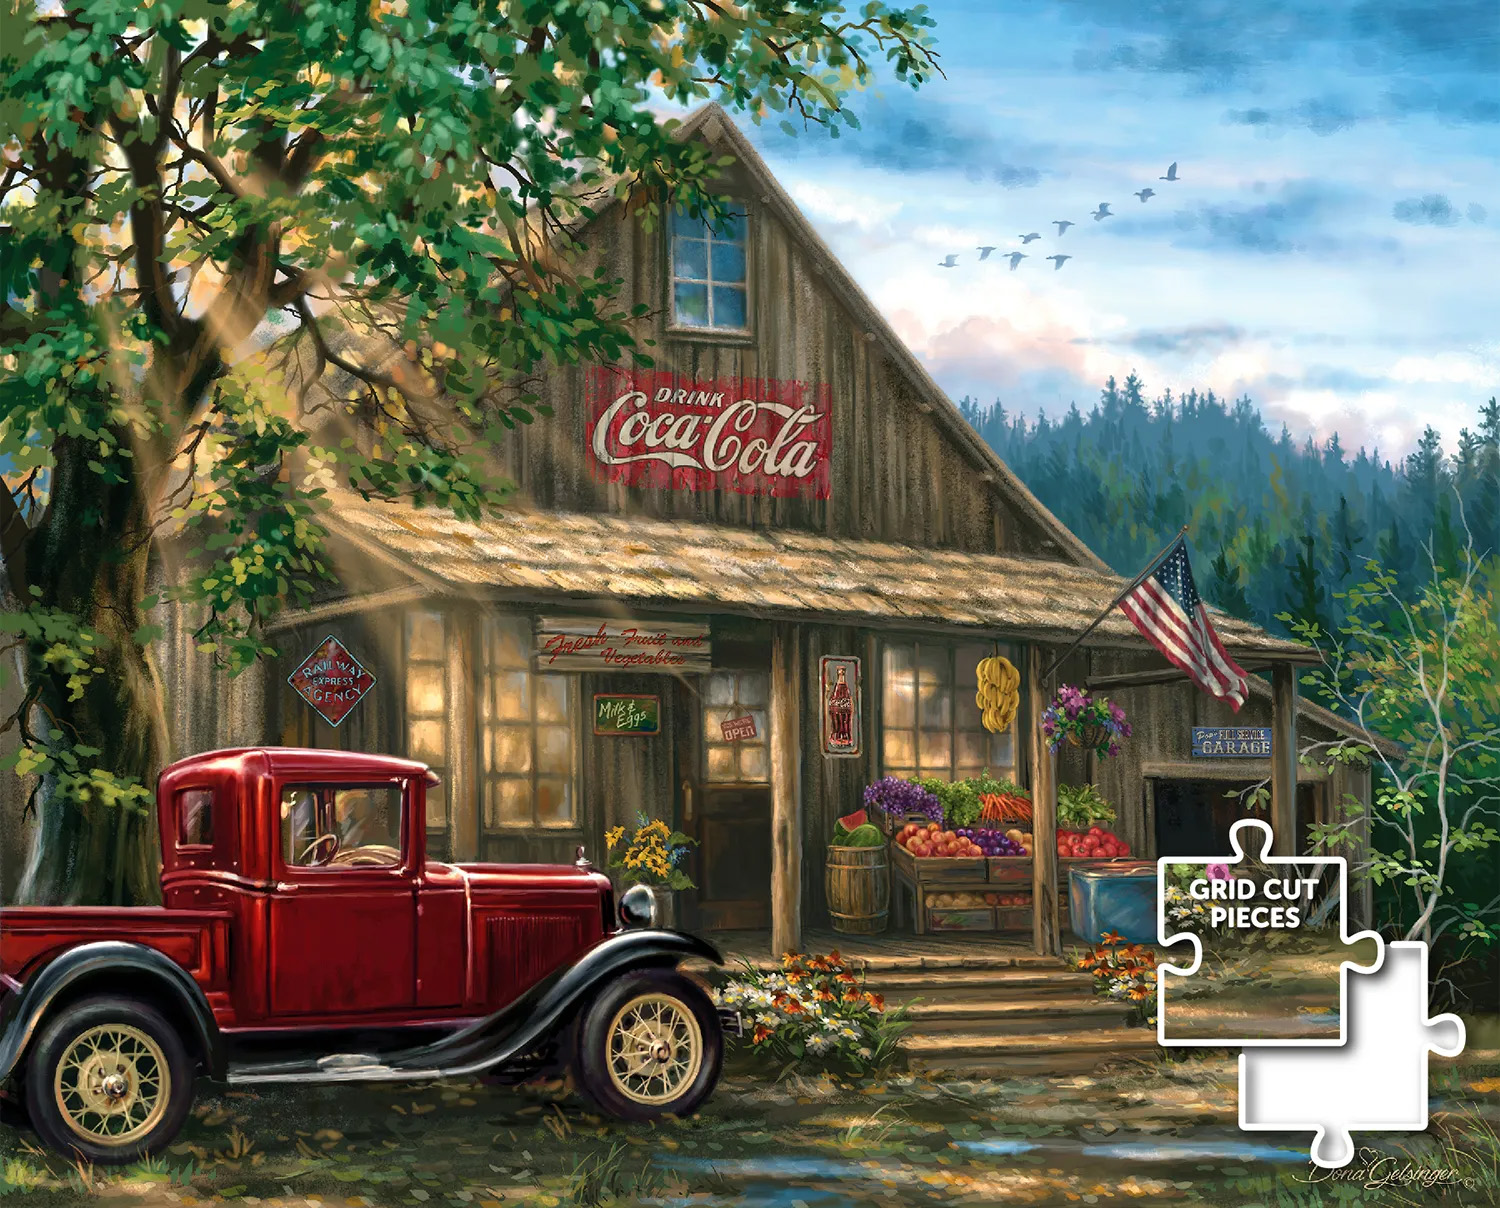 Country General Store